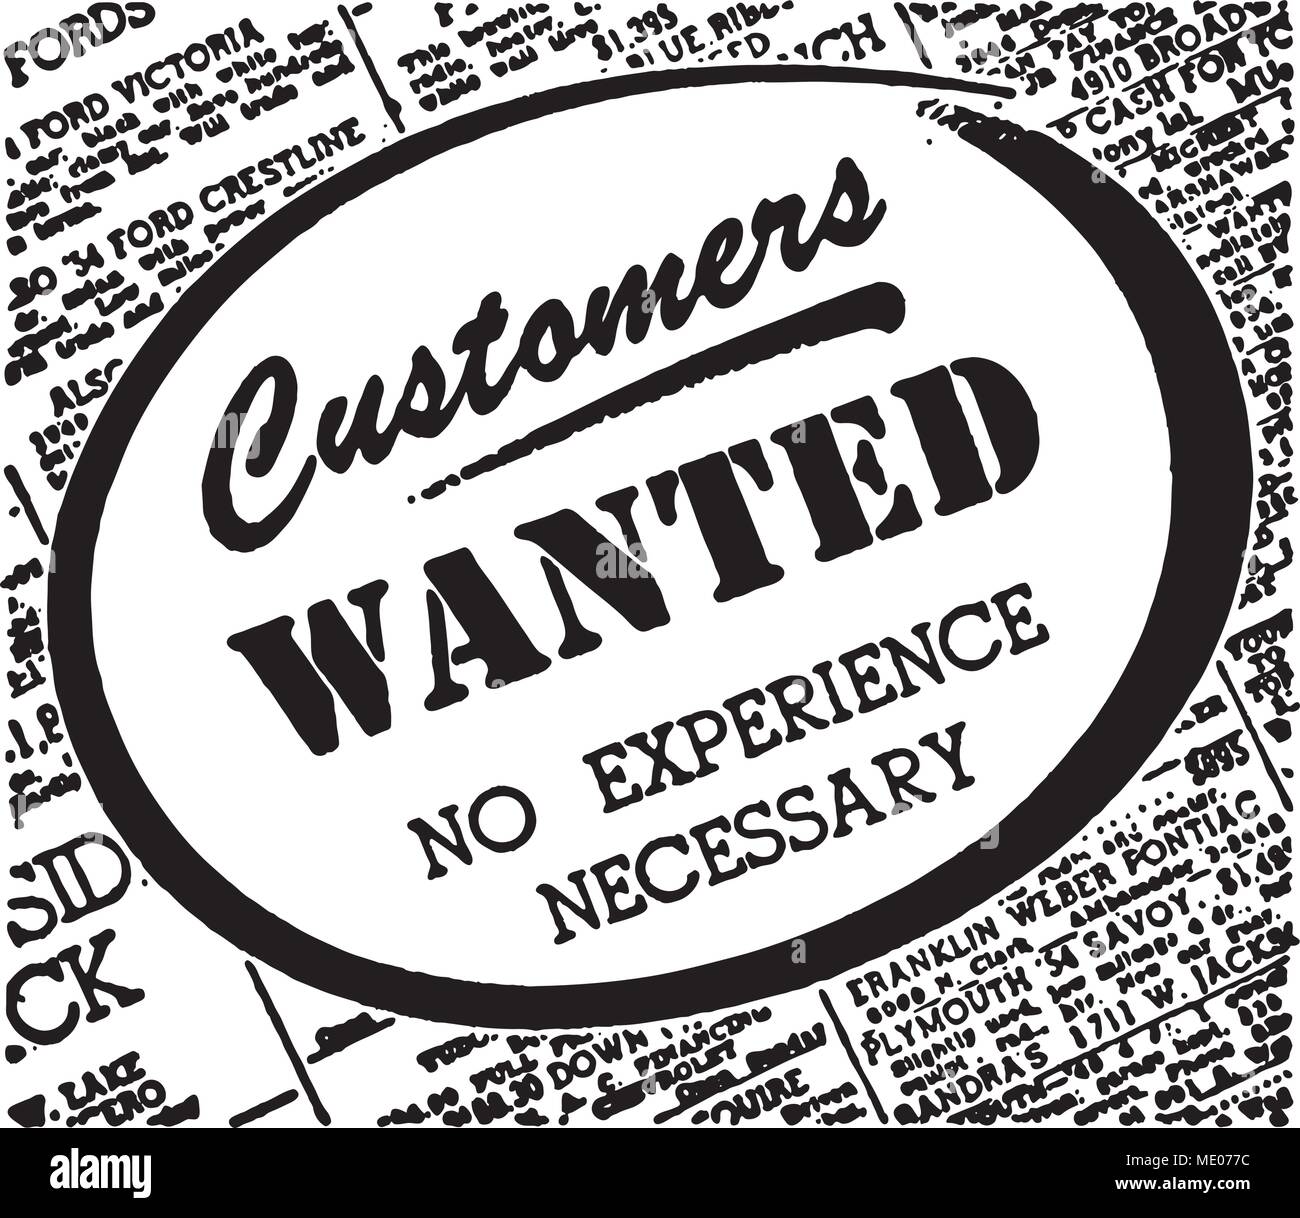 Customers Wanted - Retro Ad Art Banner Stock Vector